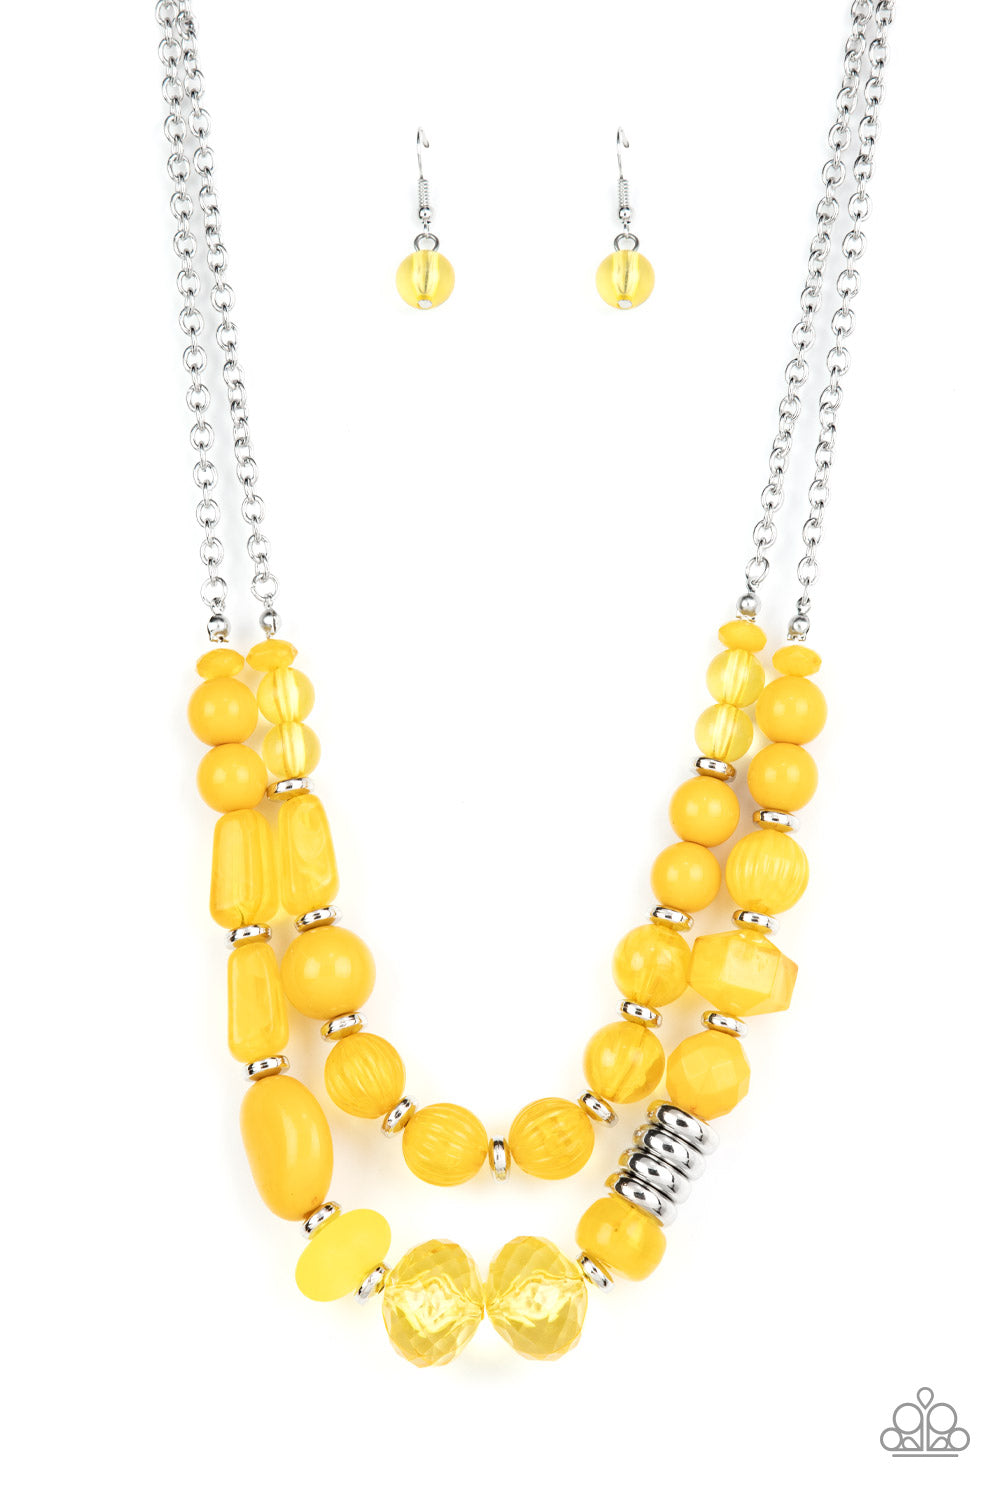 Varying in shape, size, and opacity, a refreshing collection of mustard yellow acrylic and crystal-like beads join silver discs along invisible wires that flawlessly layer below the collar for an earthy pop of color. Features an adjustable clasp closure.